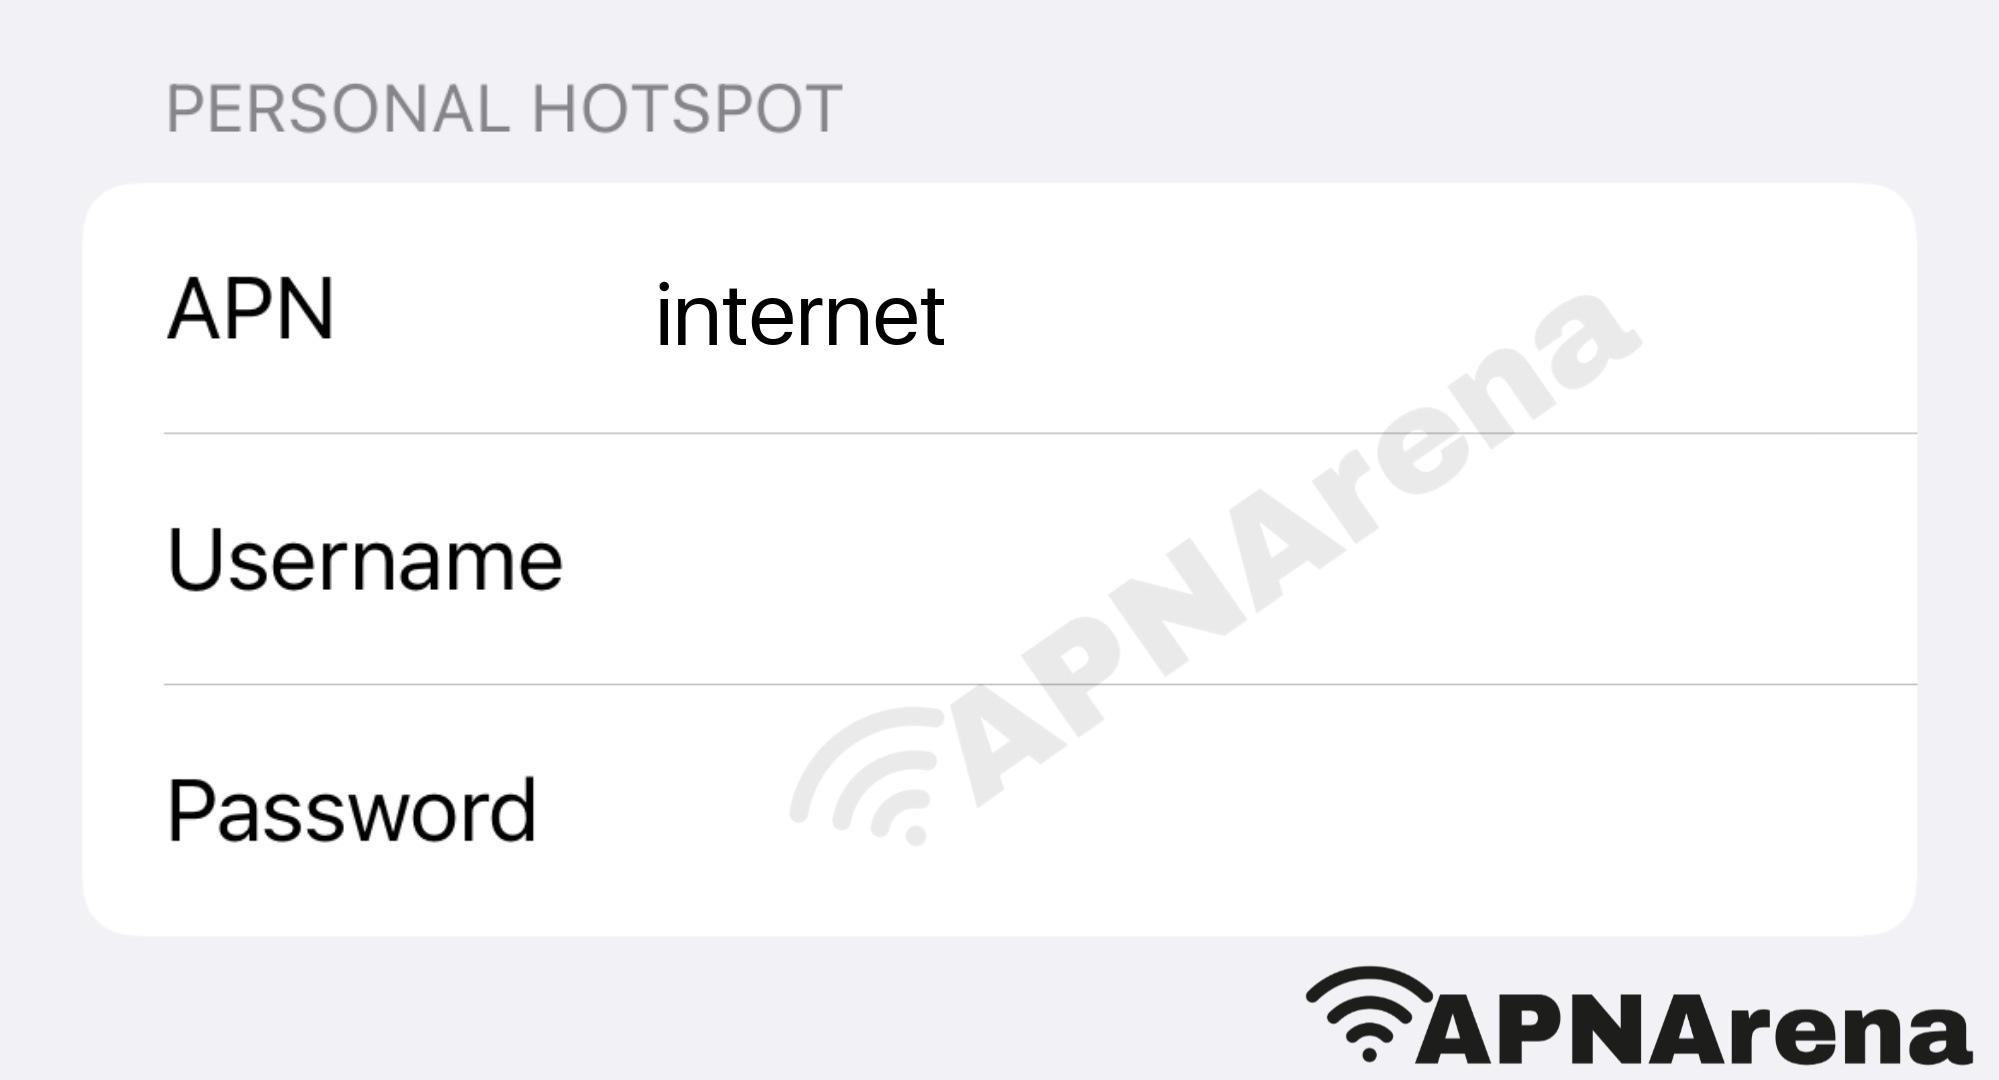 redONE Singapore Personal Hotspot Settings for iPhone